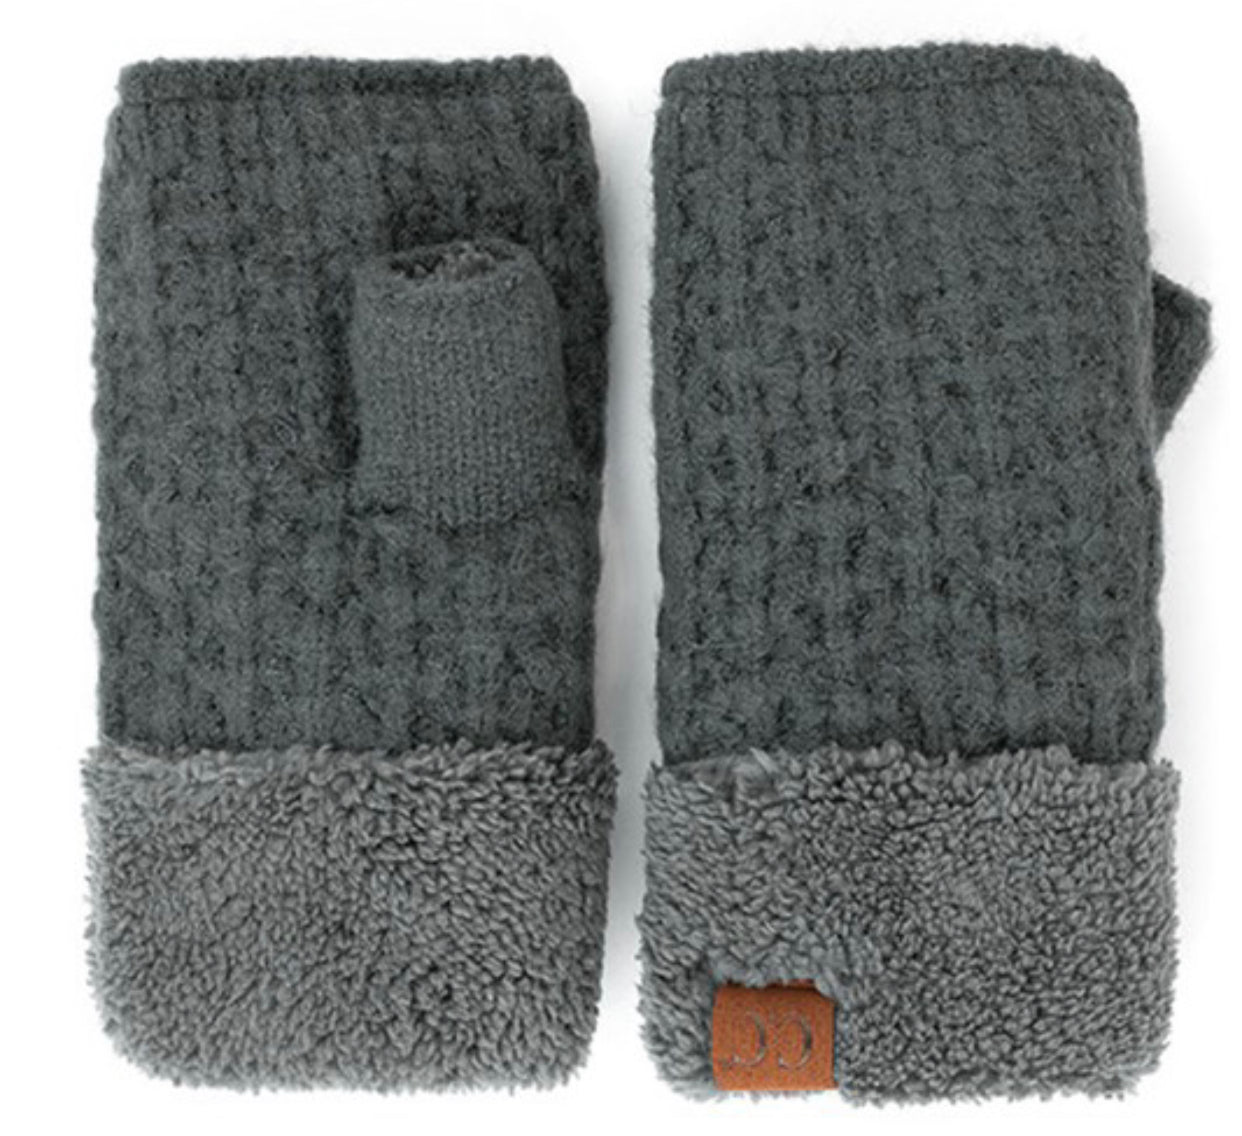 HOT ITEM! CC fingerless gloves with soft, warm lining (many colors available) - Dark grey/light teal - Lisa’s Boutique